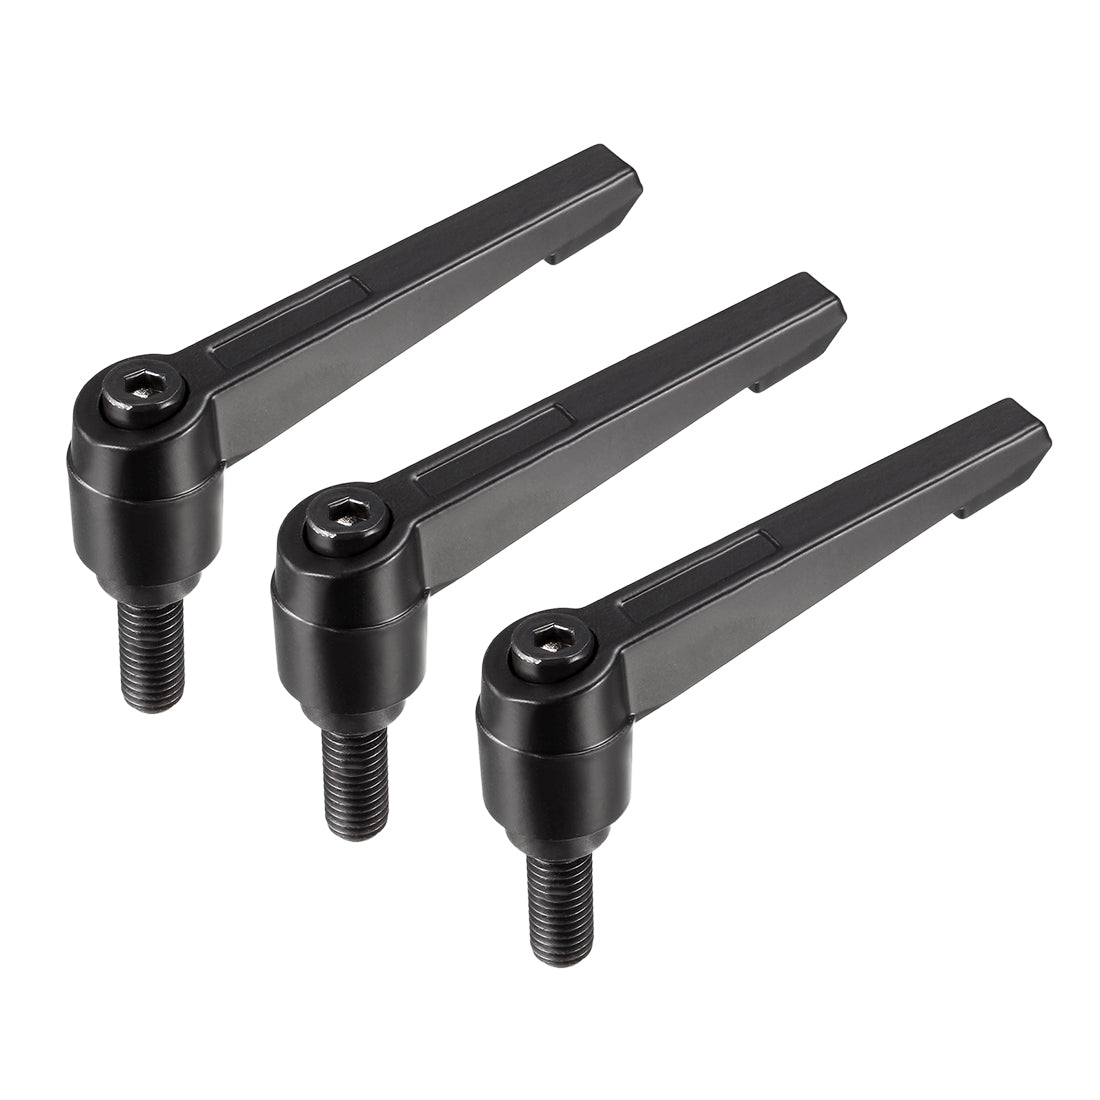 Uxcell Uxcell M8 x 32mm Handle Adjustable Clamping Lever Thread Push Button Ratchet Male Threaded Stud 3 Pcs